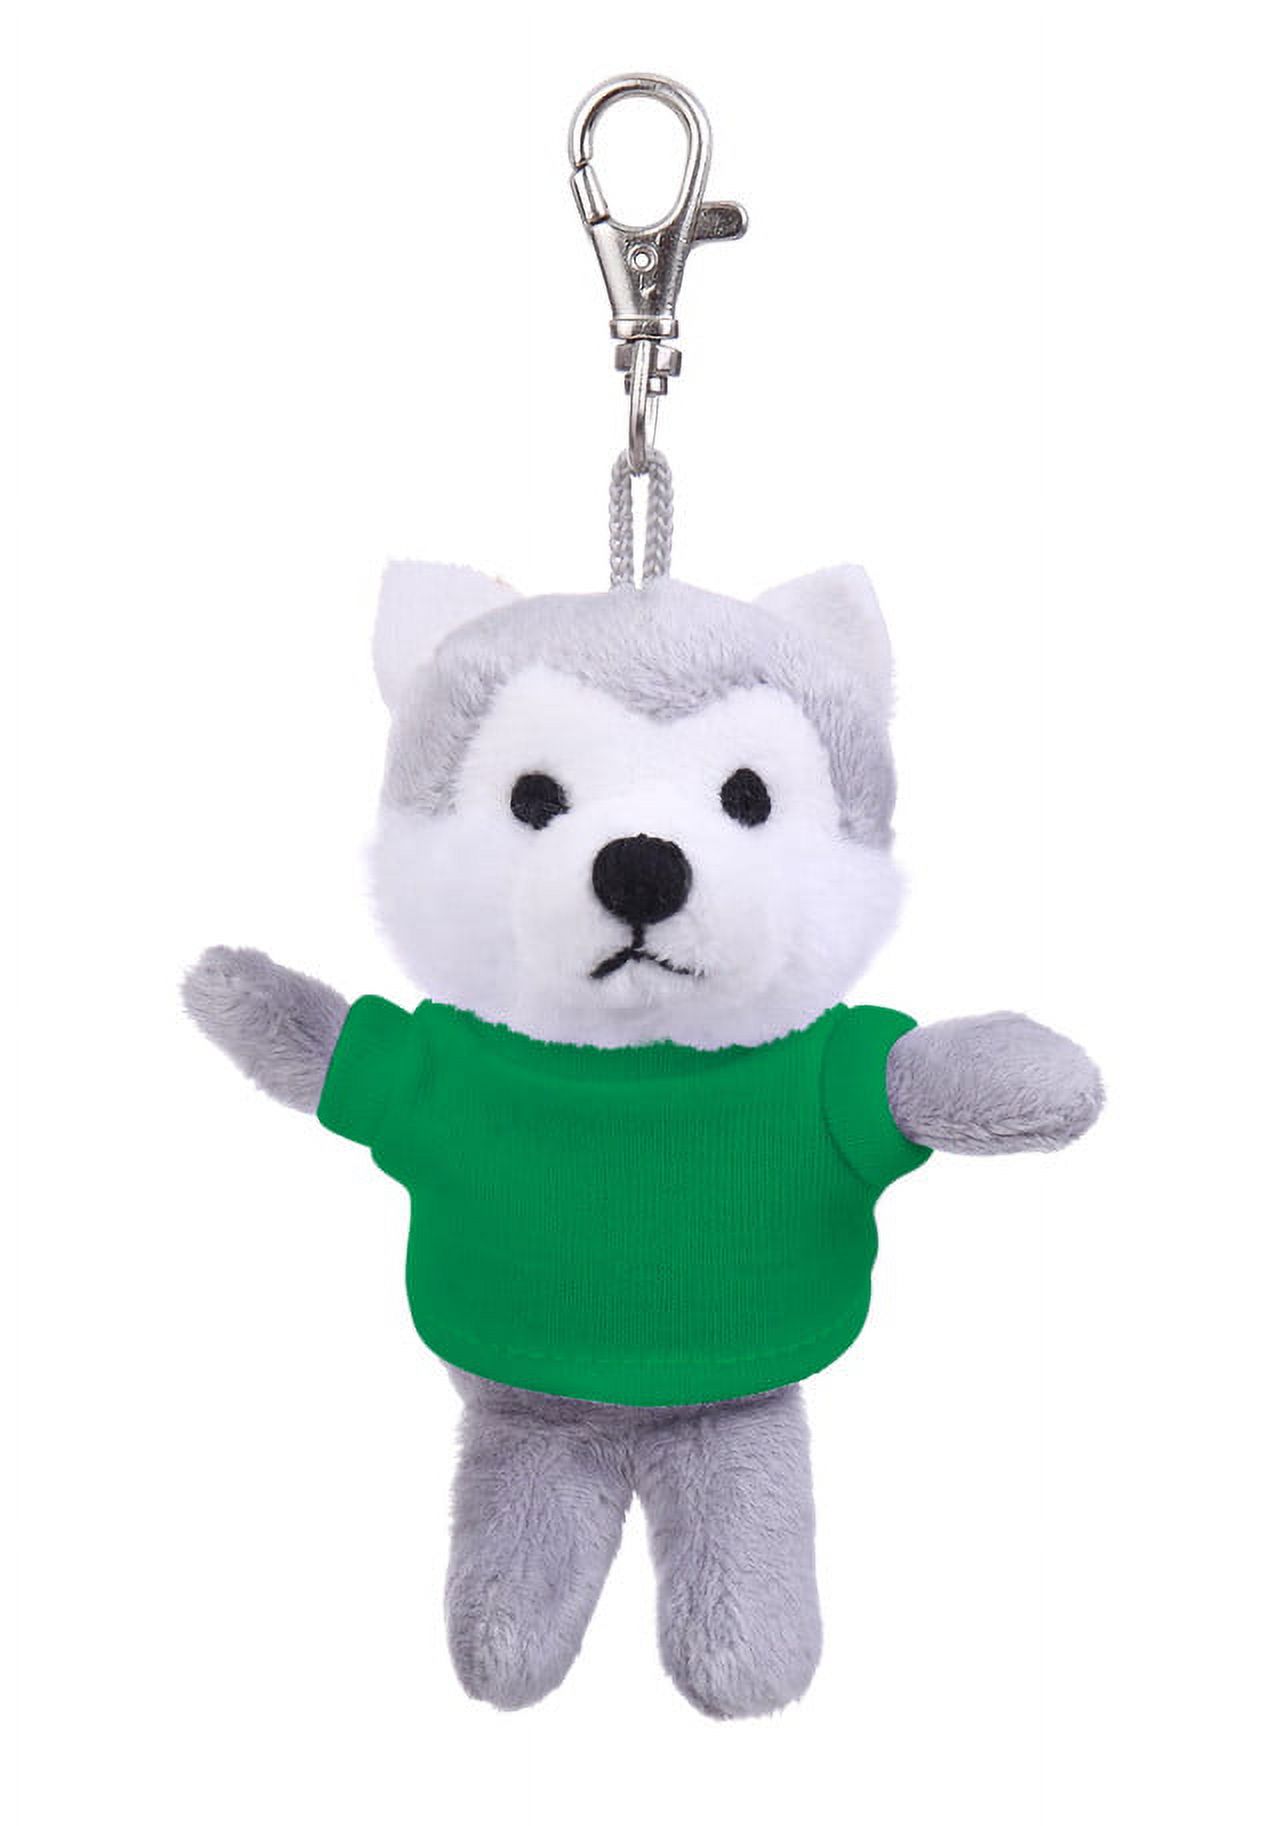 Plushland Made by Aliens Personalized Plush Husky Dog Keychain 5 Inches Stuffed Animals Backpack Ornaments Pendant Key Ring (Kelly Green Shirt), Adult